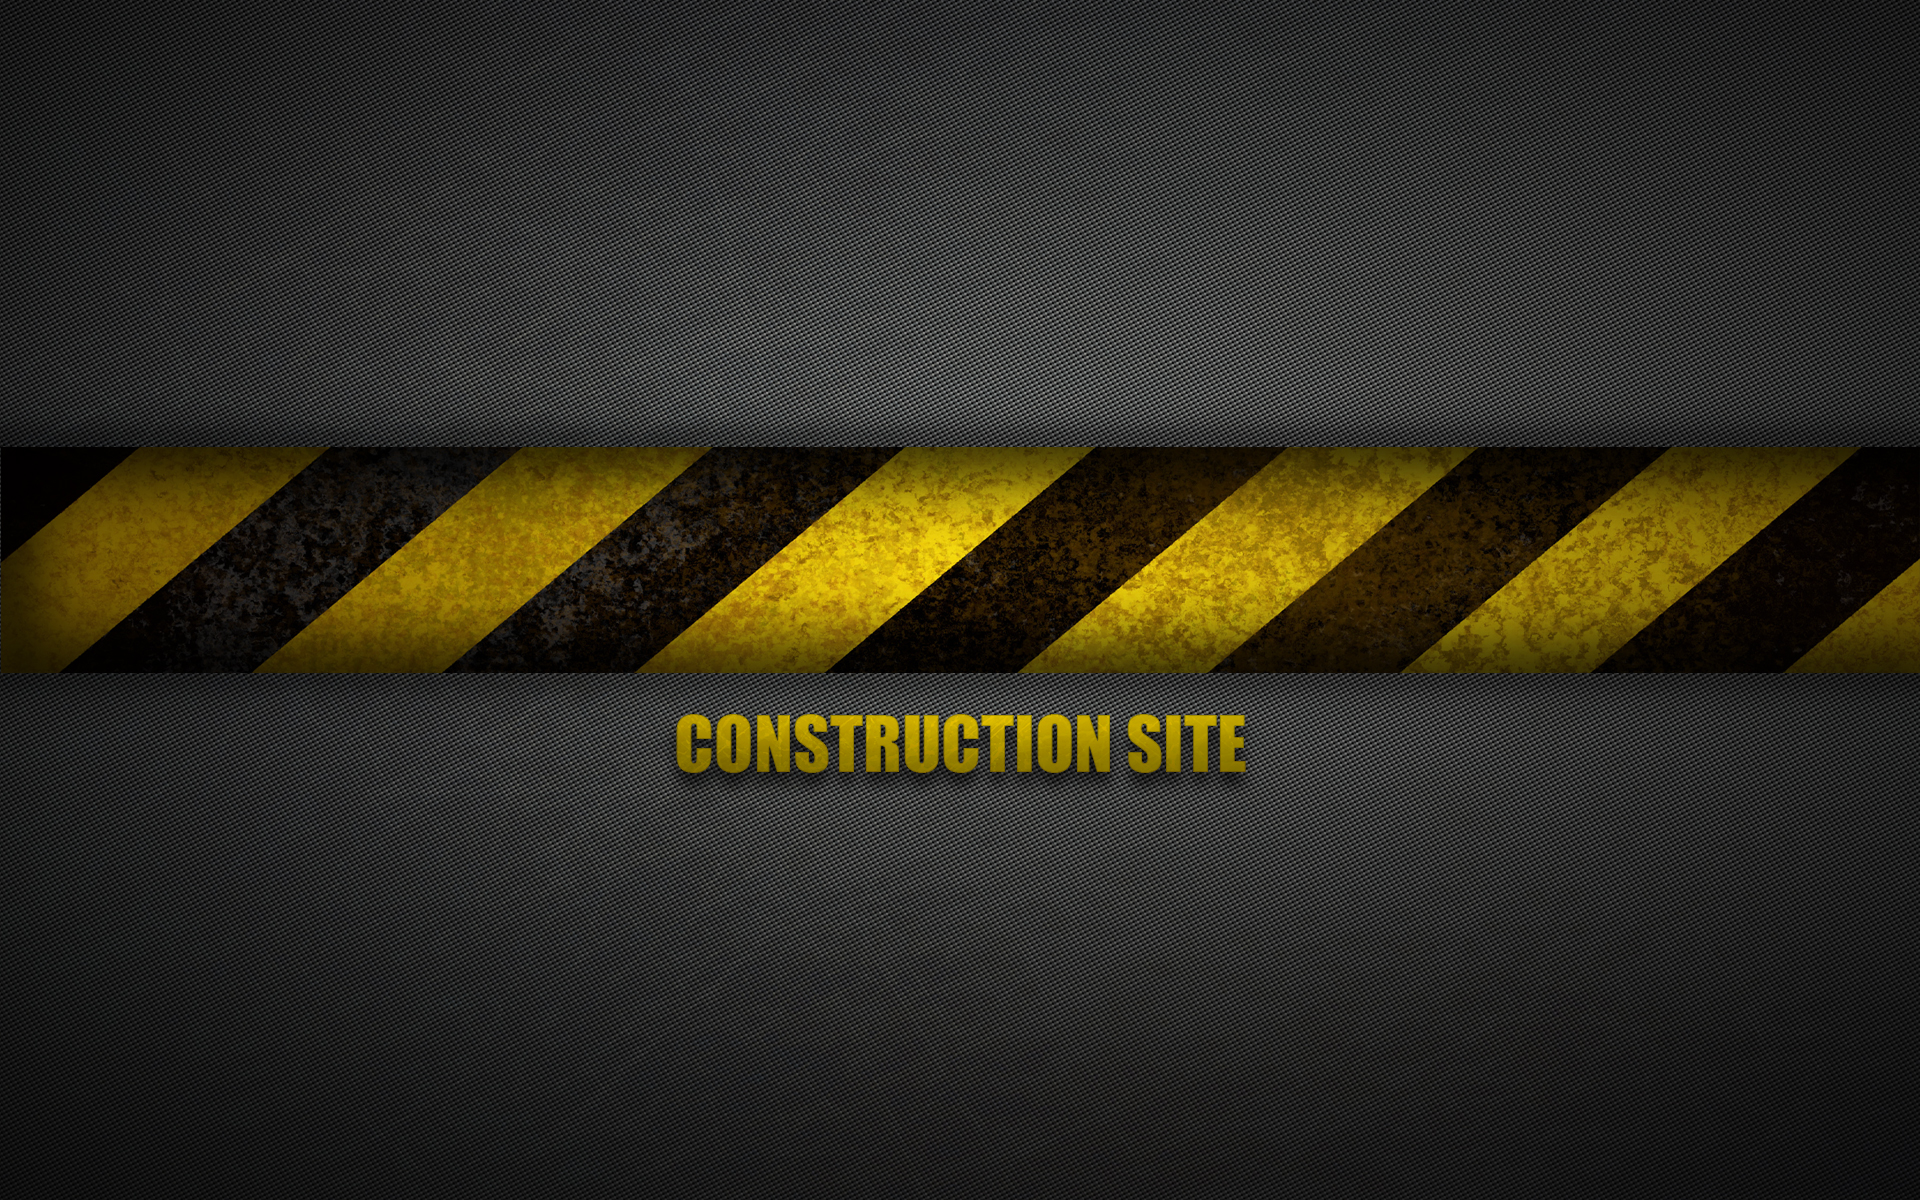 Construction Site Wallpaper By